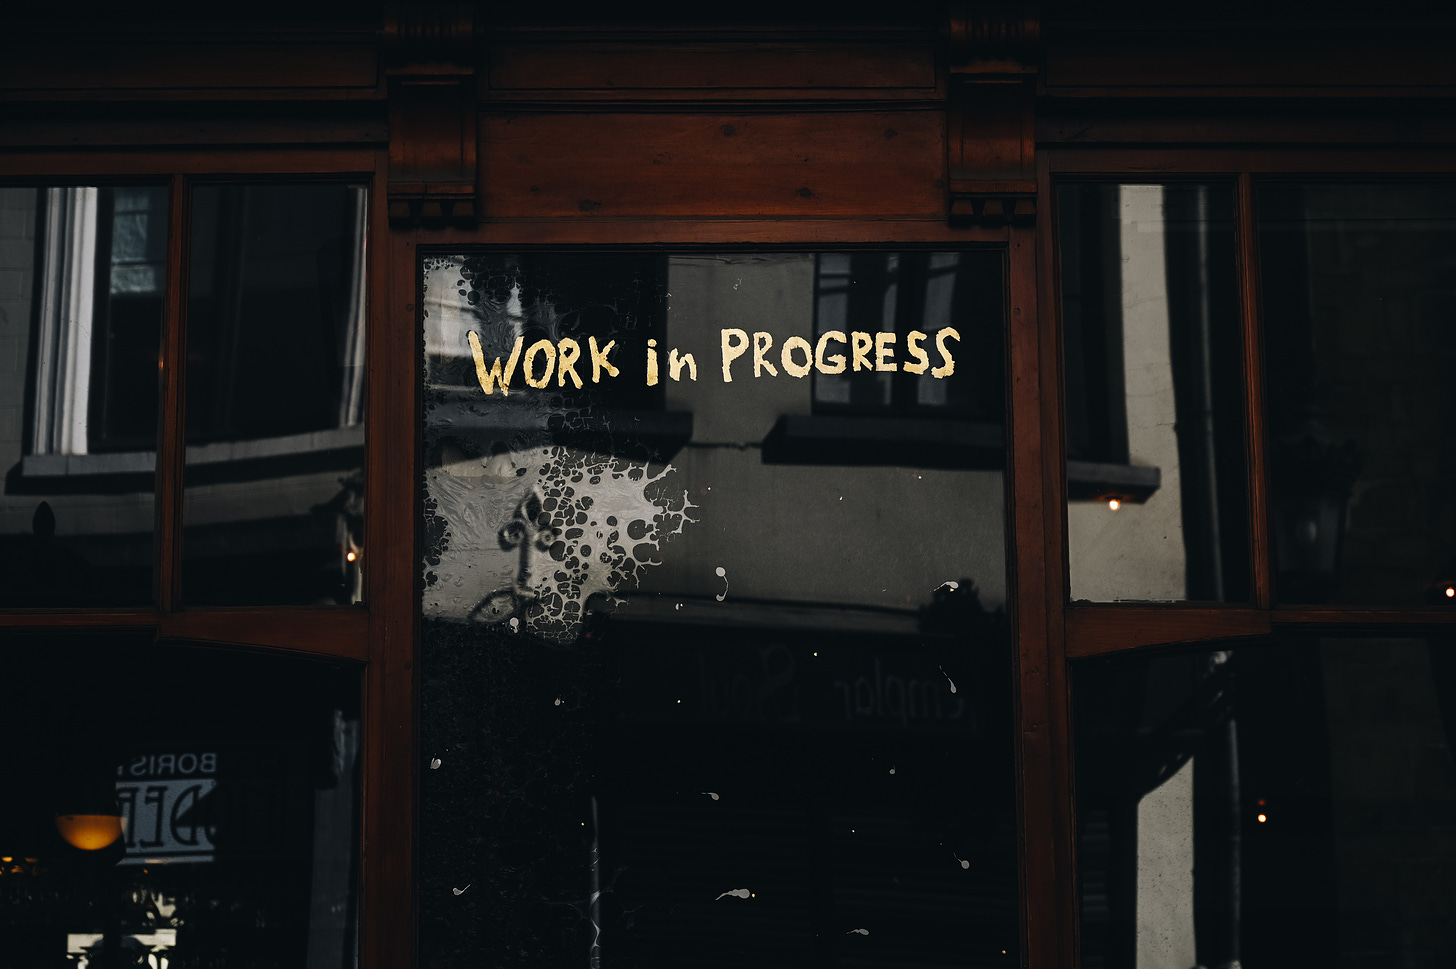 A sign on a window that says "work in progress"